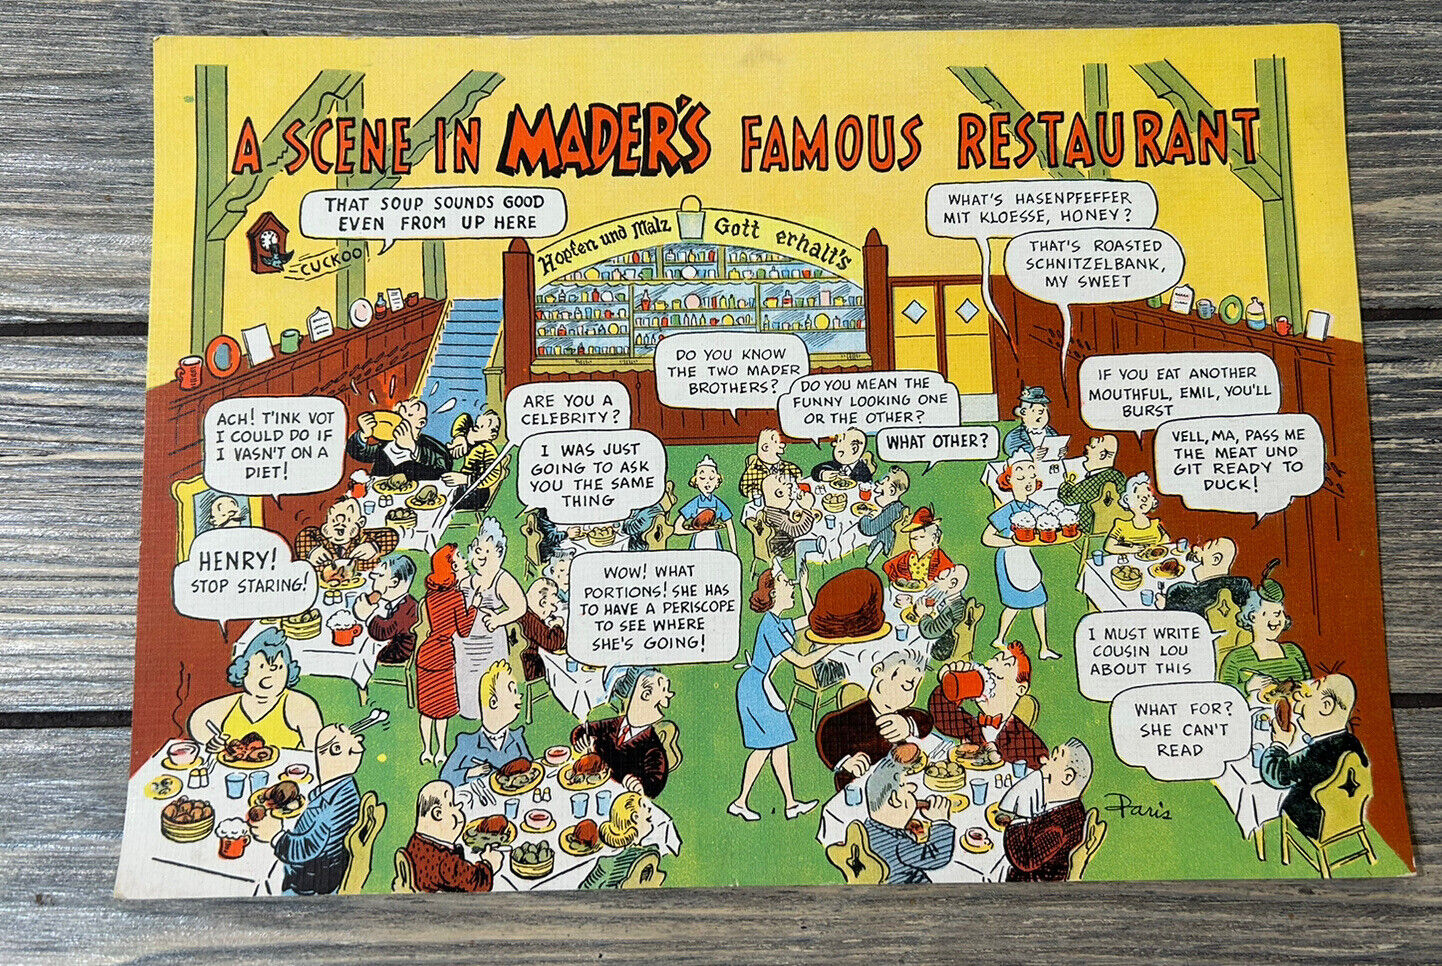 Vintage A Scene in Maders Famous Restaurant Jumbo Post Card